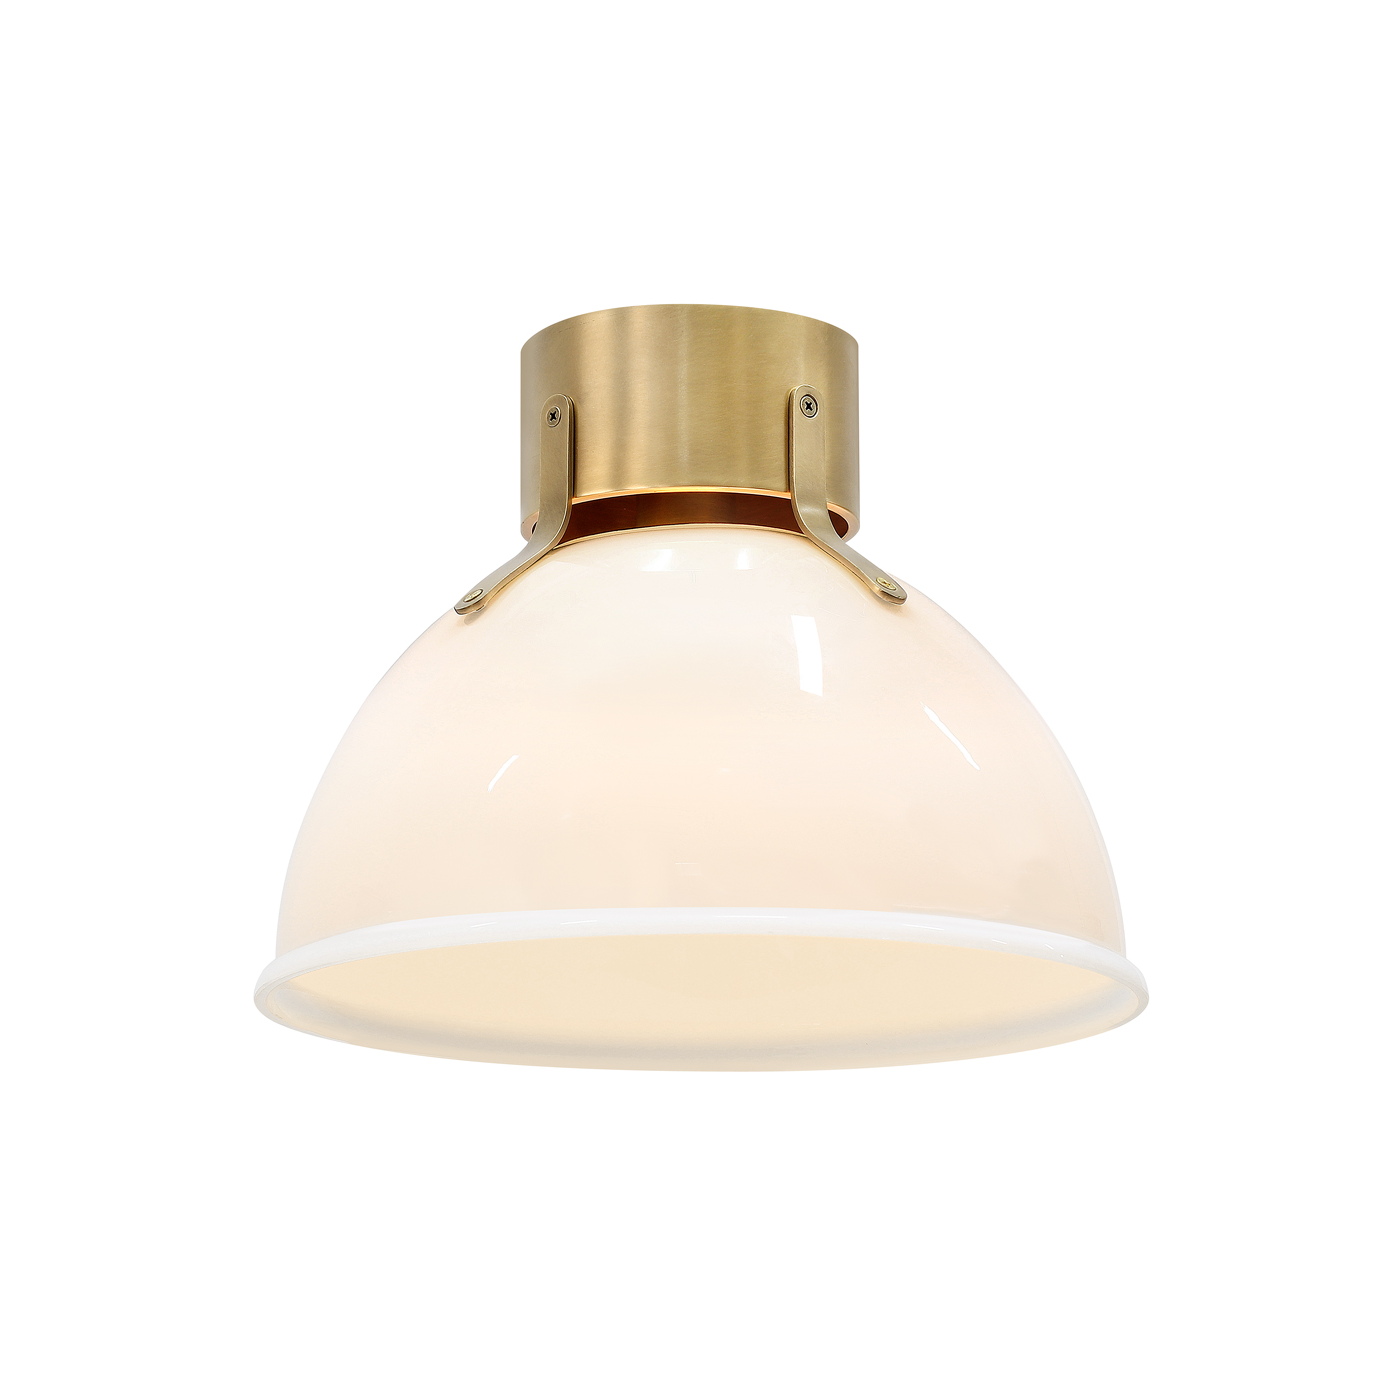 Product image of Argo Ceiling Light Opal Glass with light on